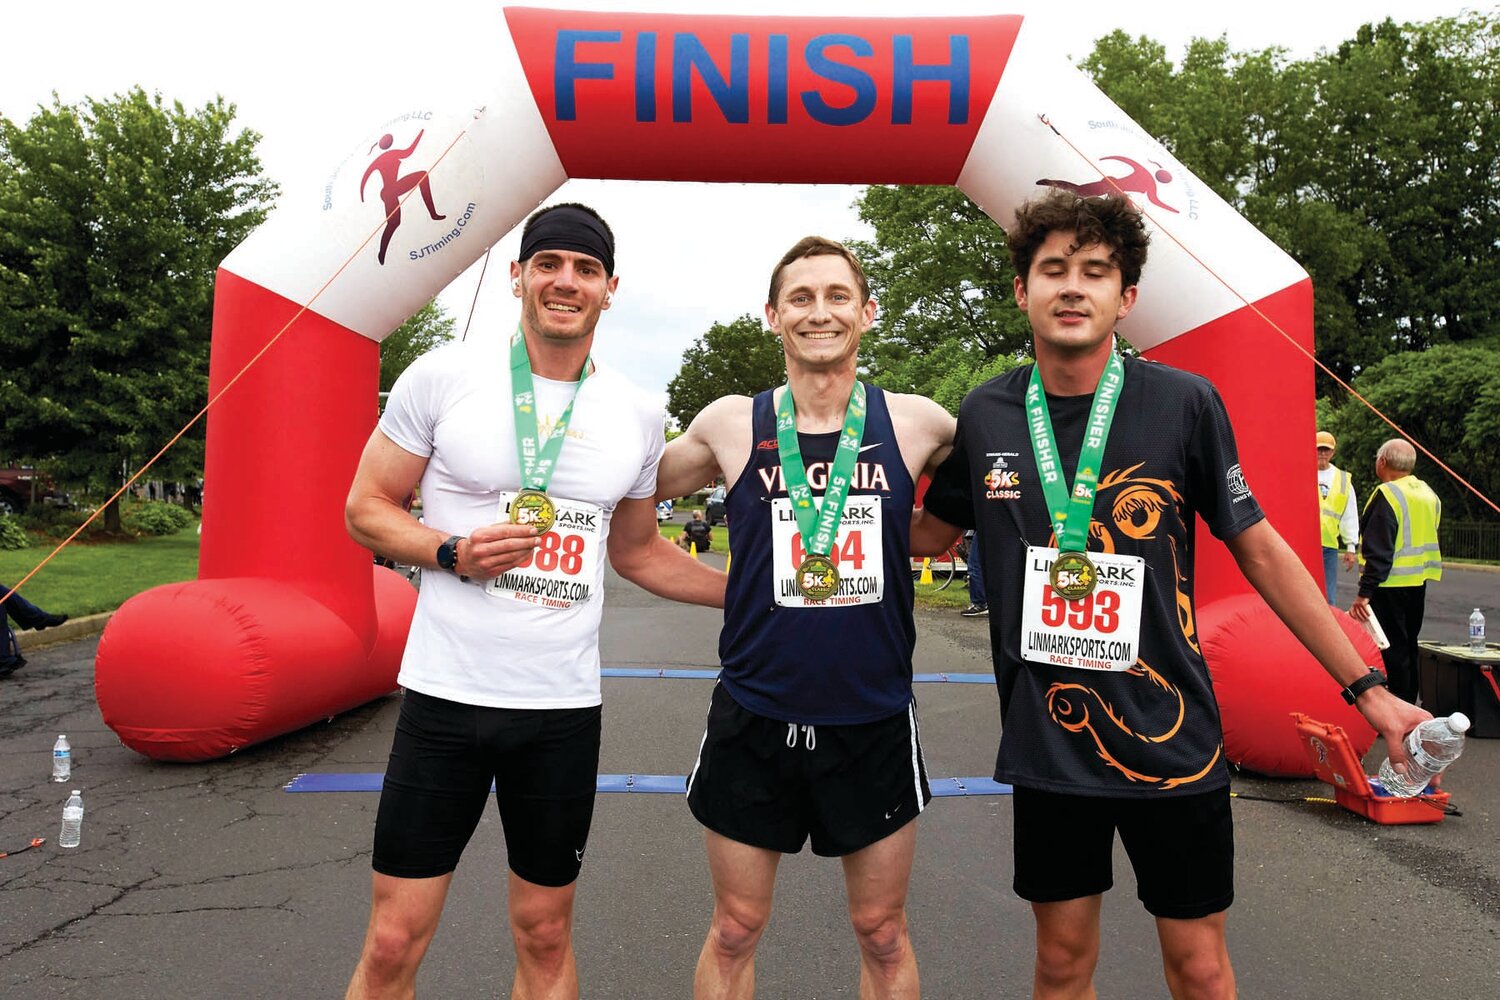 Bill Craven of Glenside, Luke Holman of Arlington, Va., and Chris Baisden of Bensalem, finished third, first and second, respectively, in the Sesame Place Classic 5K.